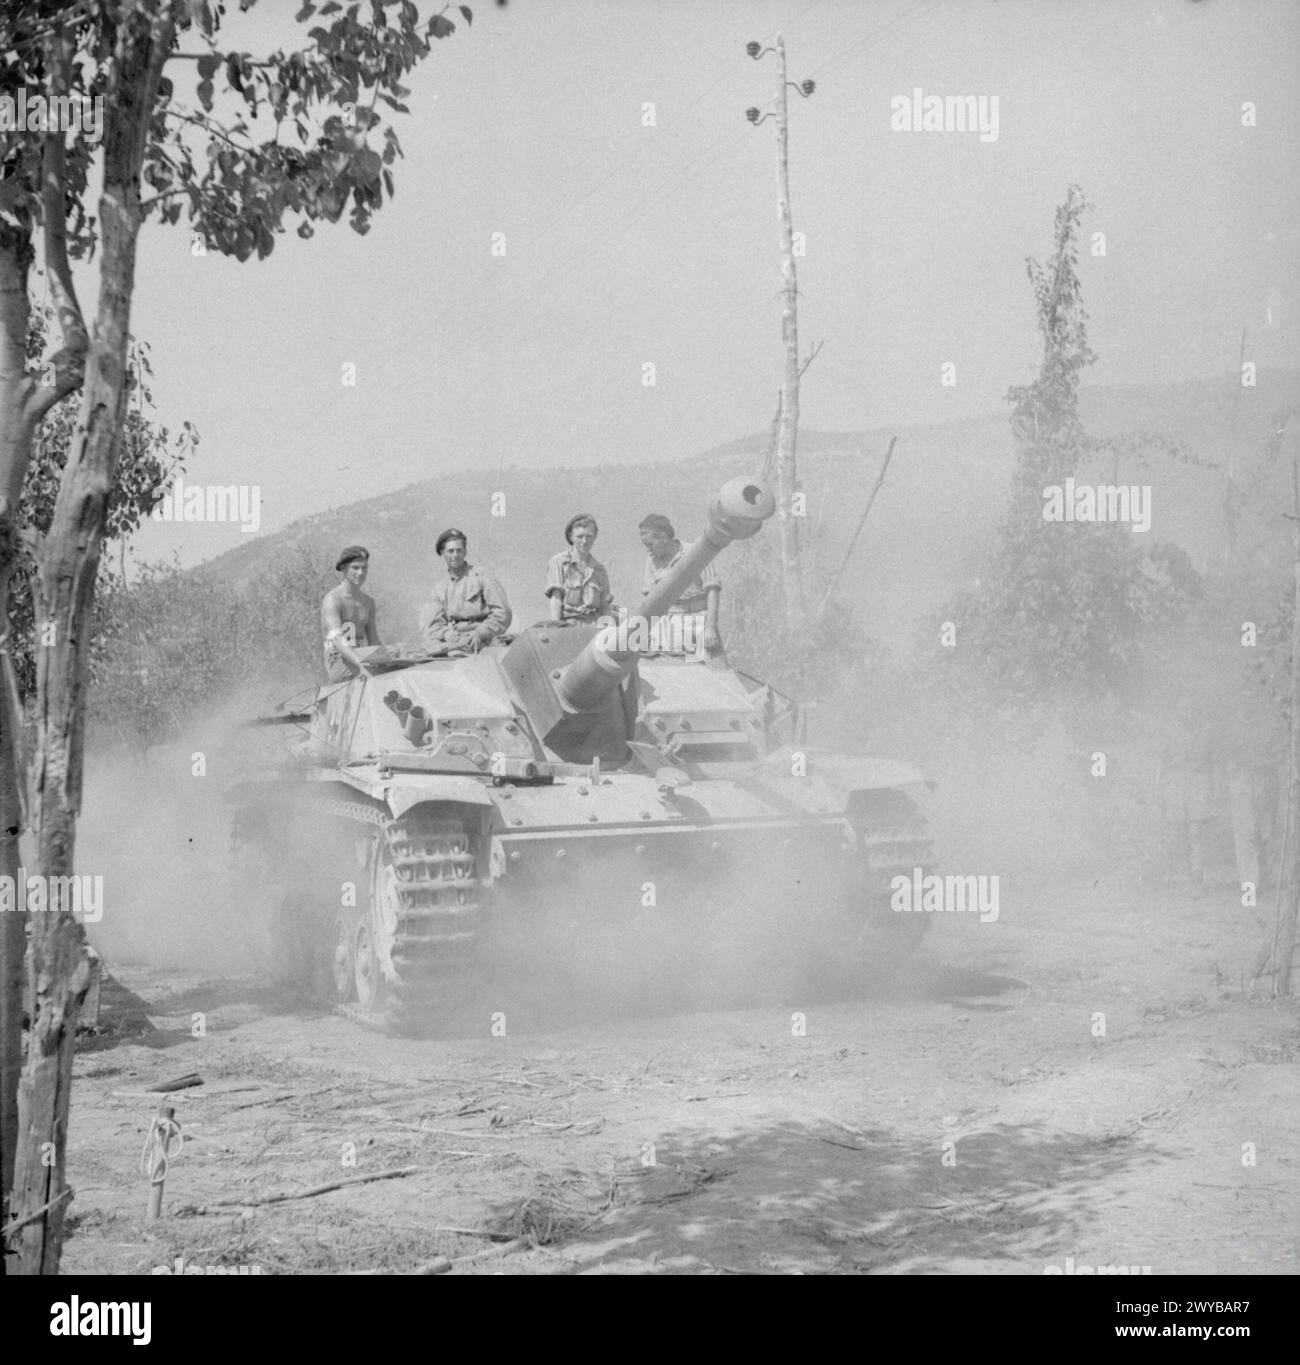 THE BRITISH ARMY IN ITALY 1943 - Men from 40th Royal Tank Regiment try out a captured German StuG III assault gun, 14 September 1943. , Stock Photo